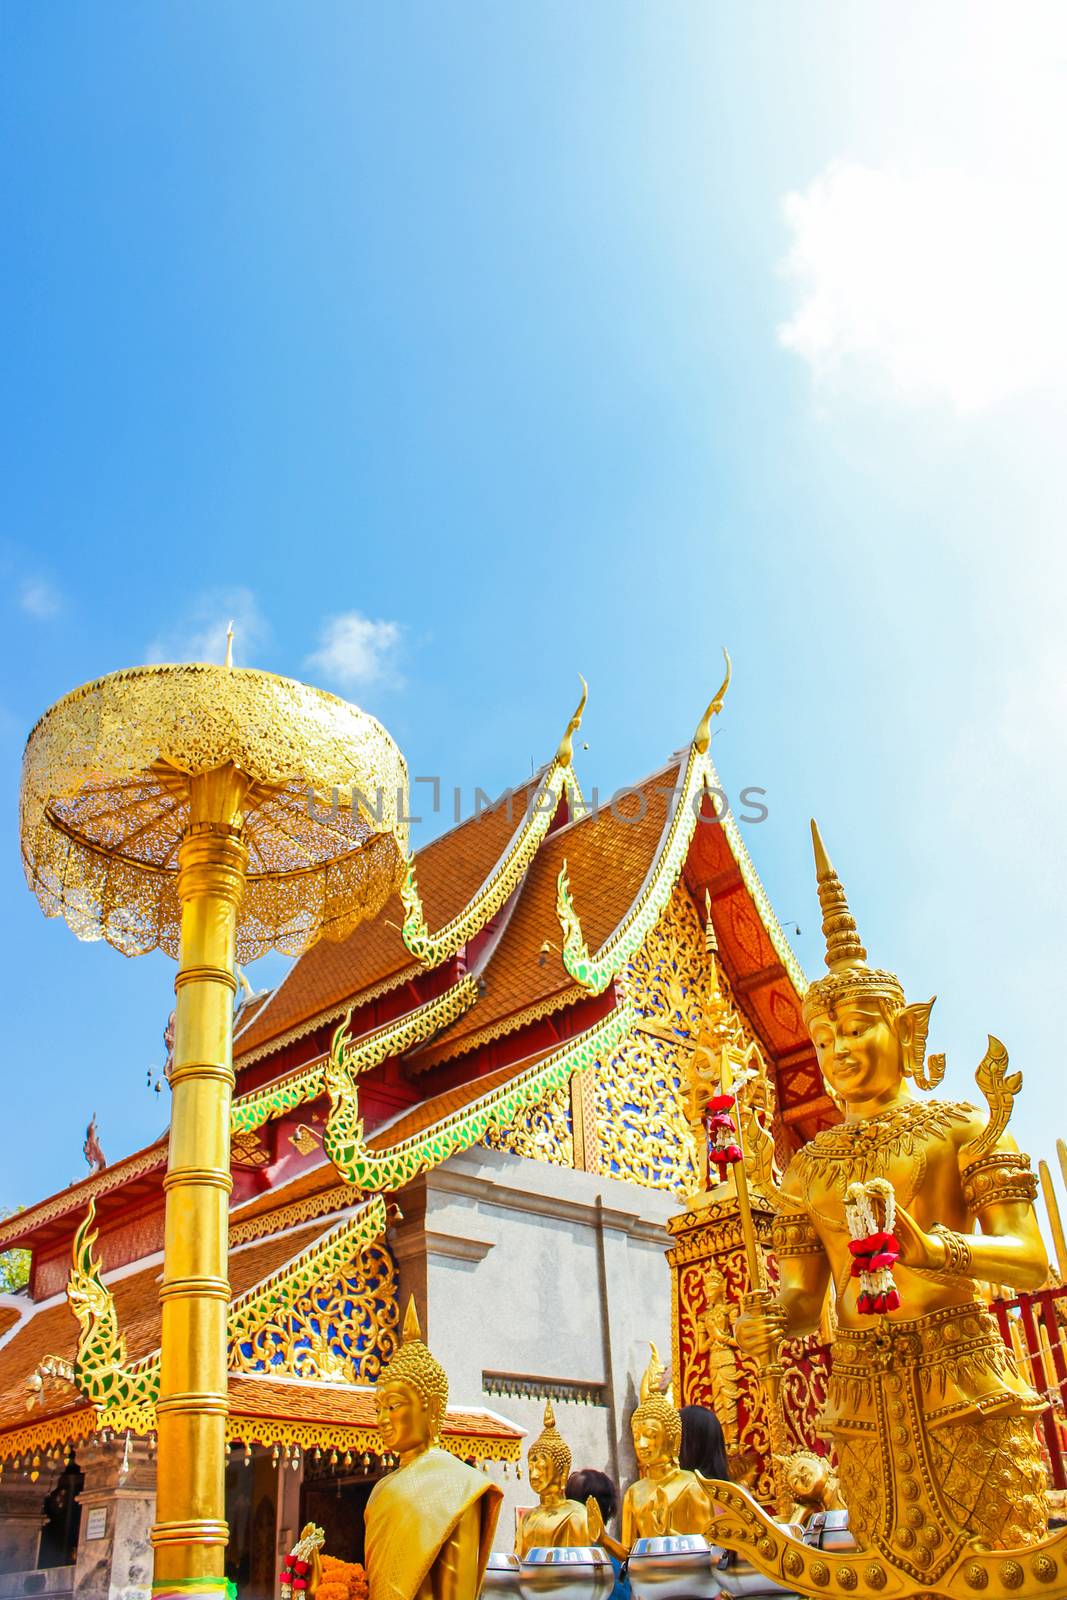 Golden building and umbrella in Wat Phra That Doi Suthep is the popular tourist destination of Chiang Mai, Thailand.